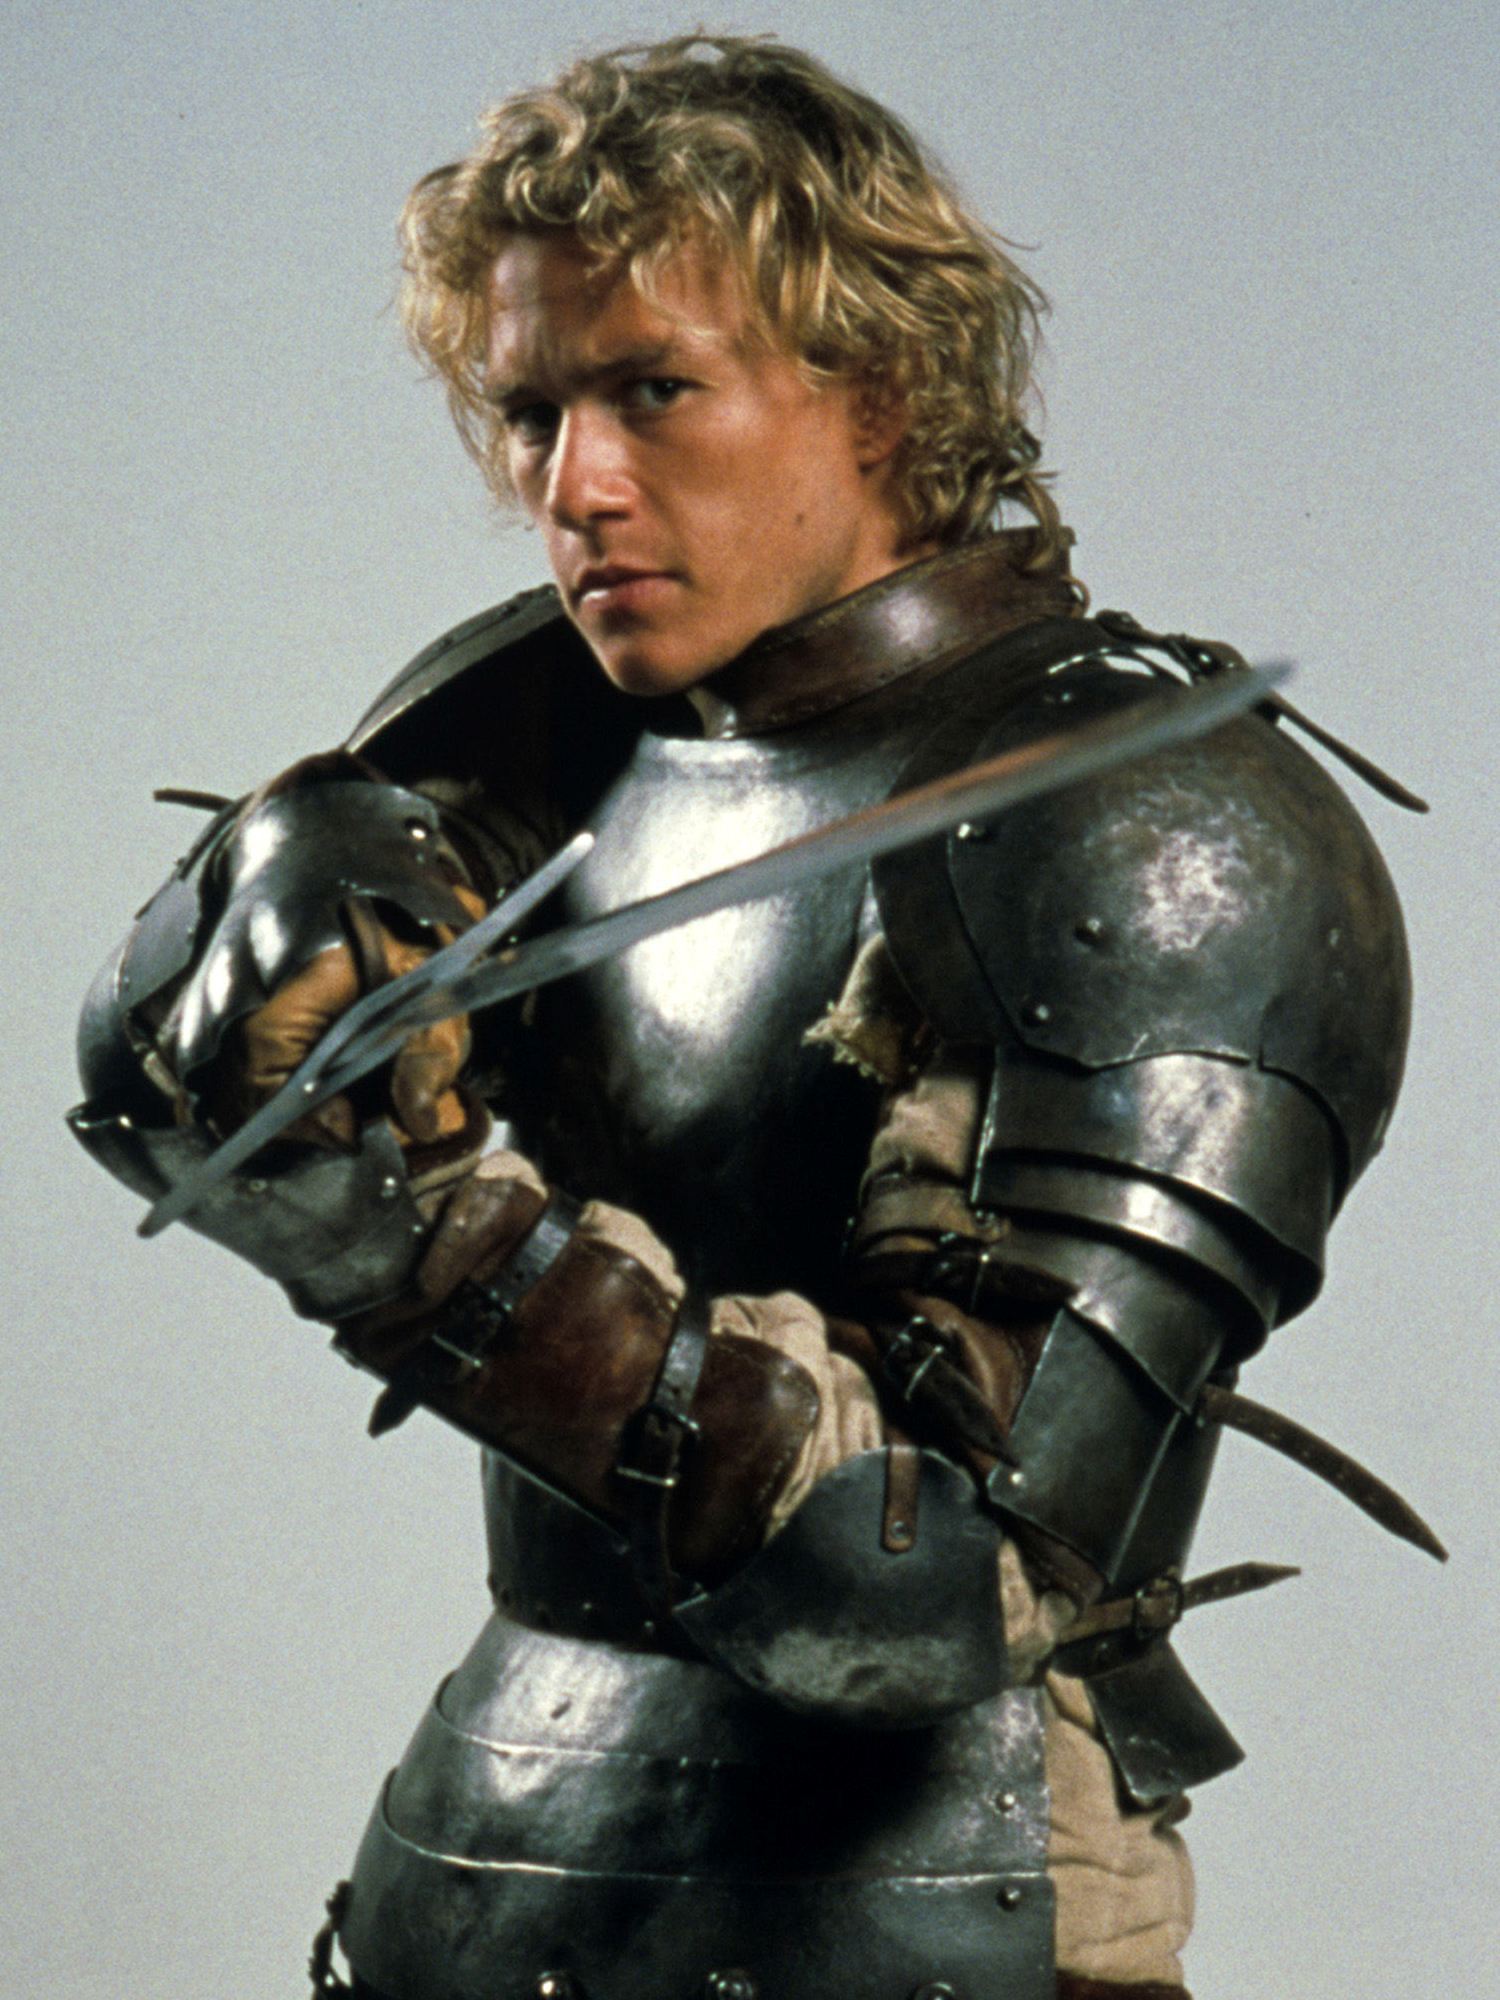 Amazing A Knight's Tale Pictures & Backgrounds